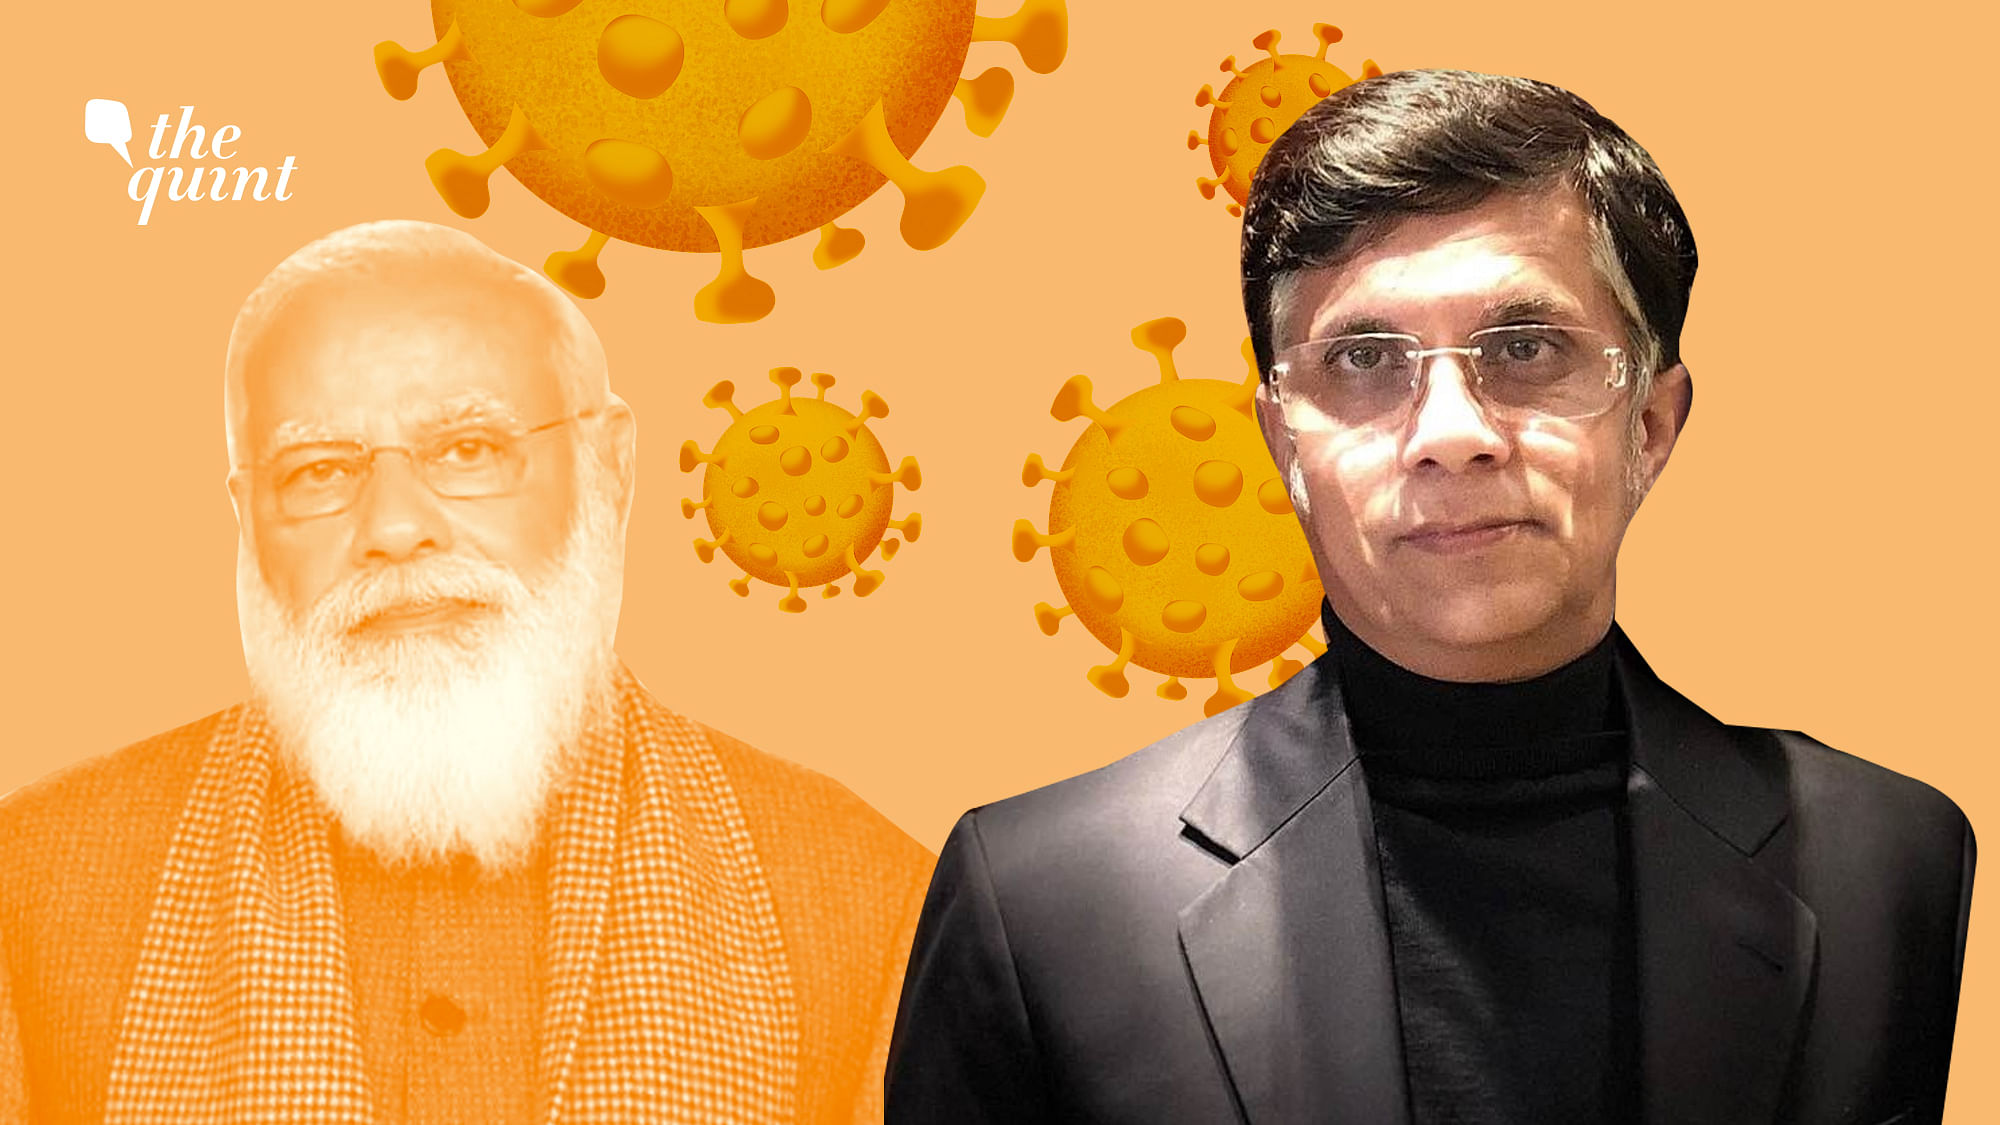 A profile photo of the article’s author, Congress party’s National Spokesperson Pawan Khera (R), and PM Modi (background), used for representational purposes.